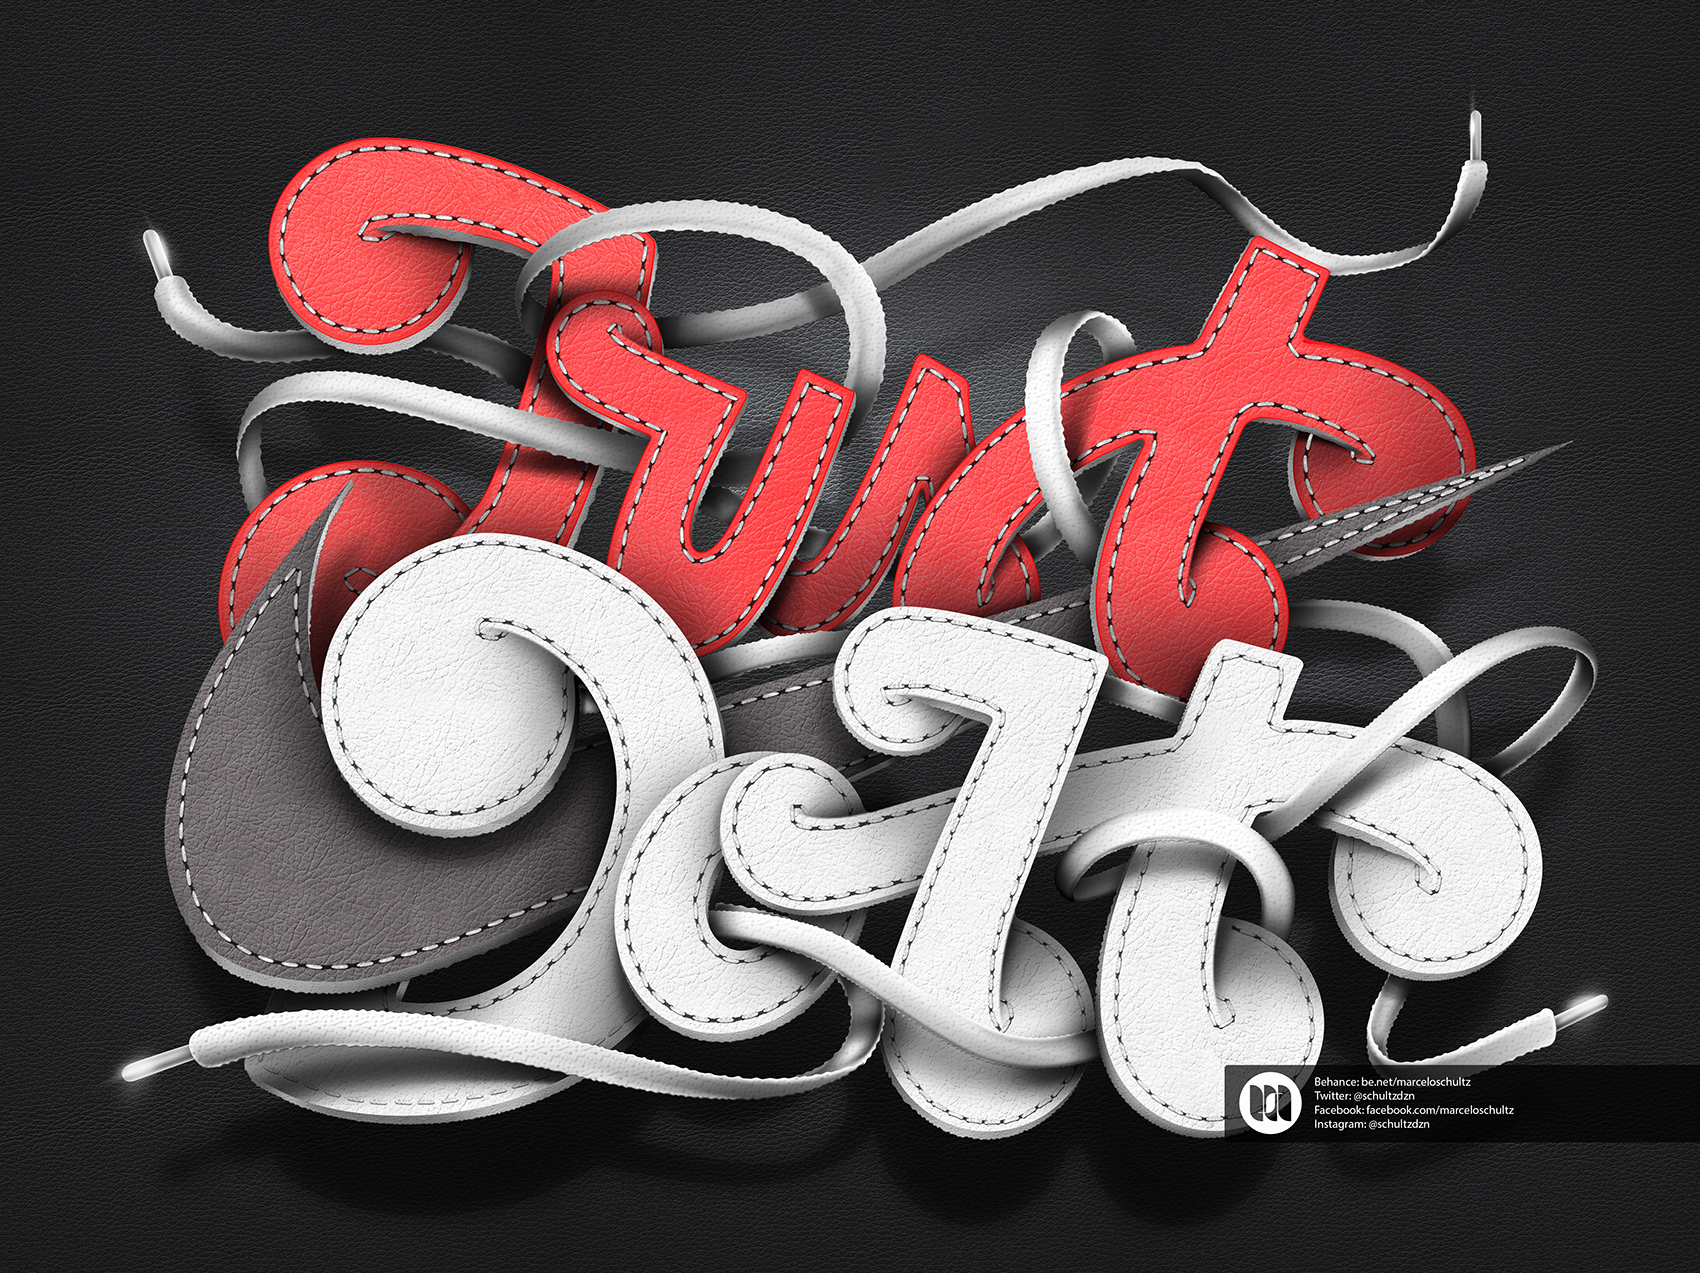 Nike - Just - Experimental Project Behance